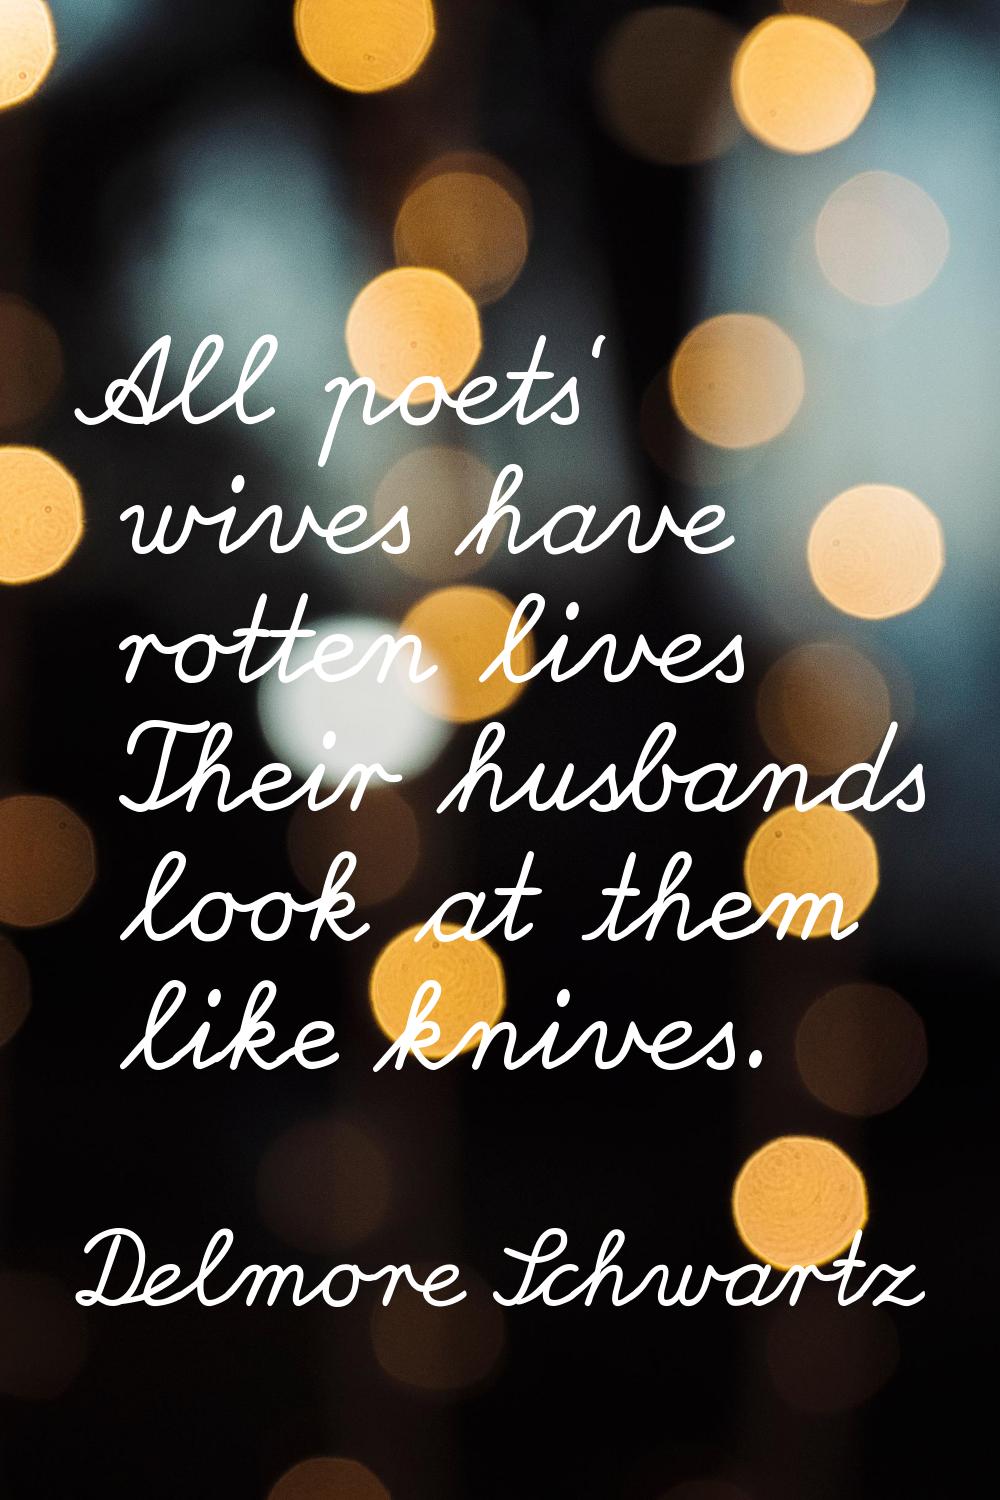 All poets' wives have rotten lives Their husbands look at them like knives.